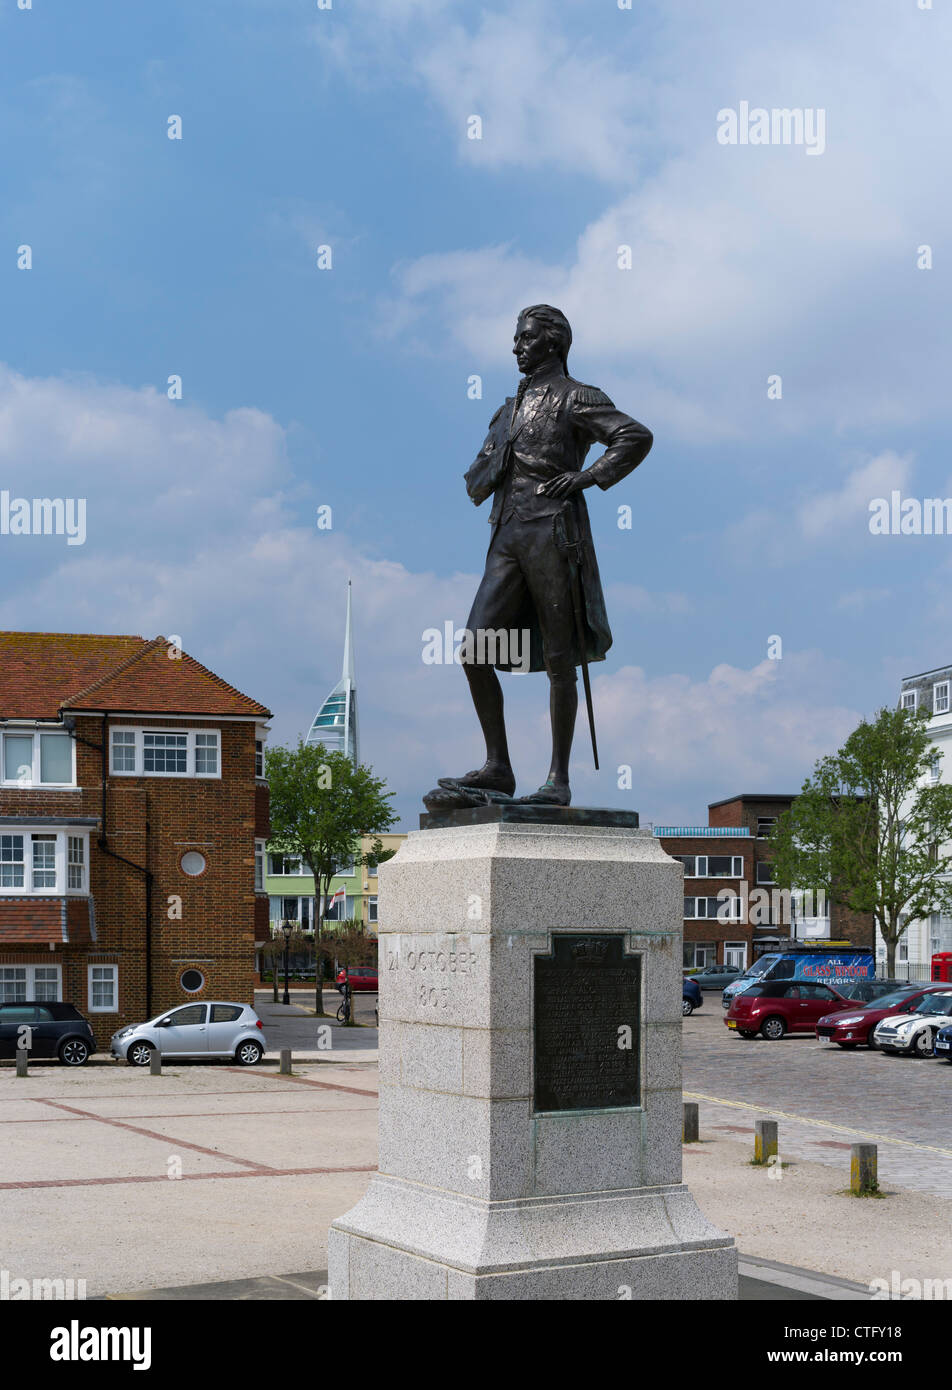 dh Lord Nelsons Statue UK PORTSMOUTH OLD HAMPSHIRE ENGLAND Statue of Vice Admiral Horatio Nelson historic naval hero monument historical monuments Stock Photo